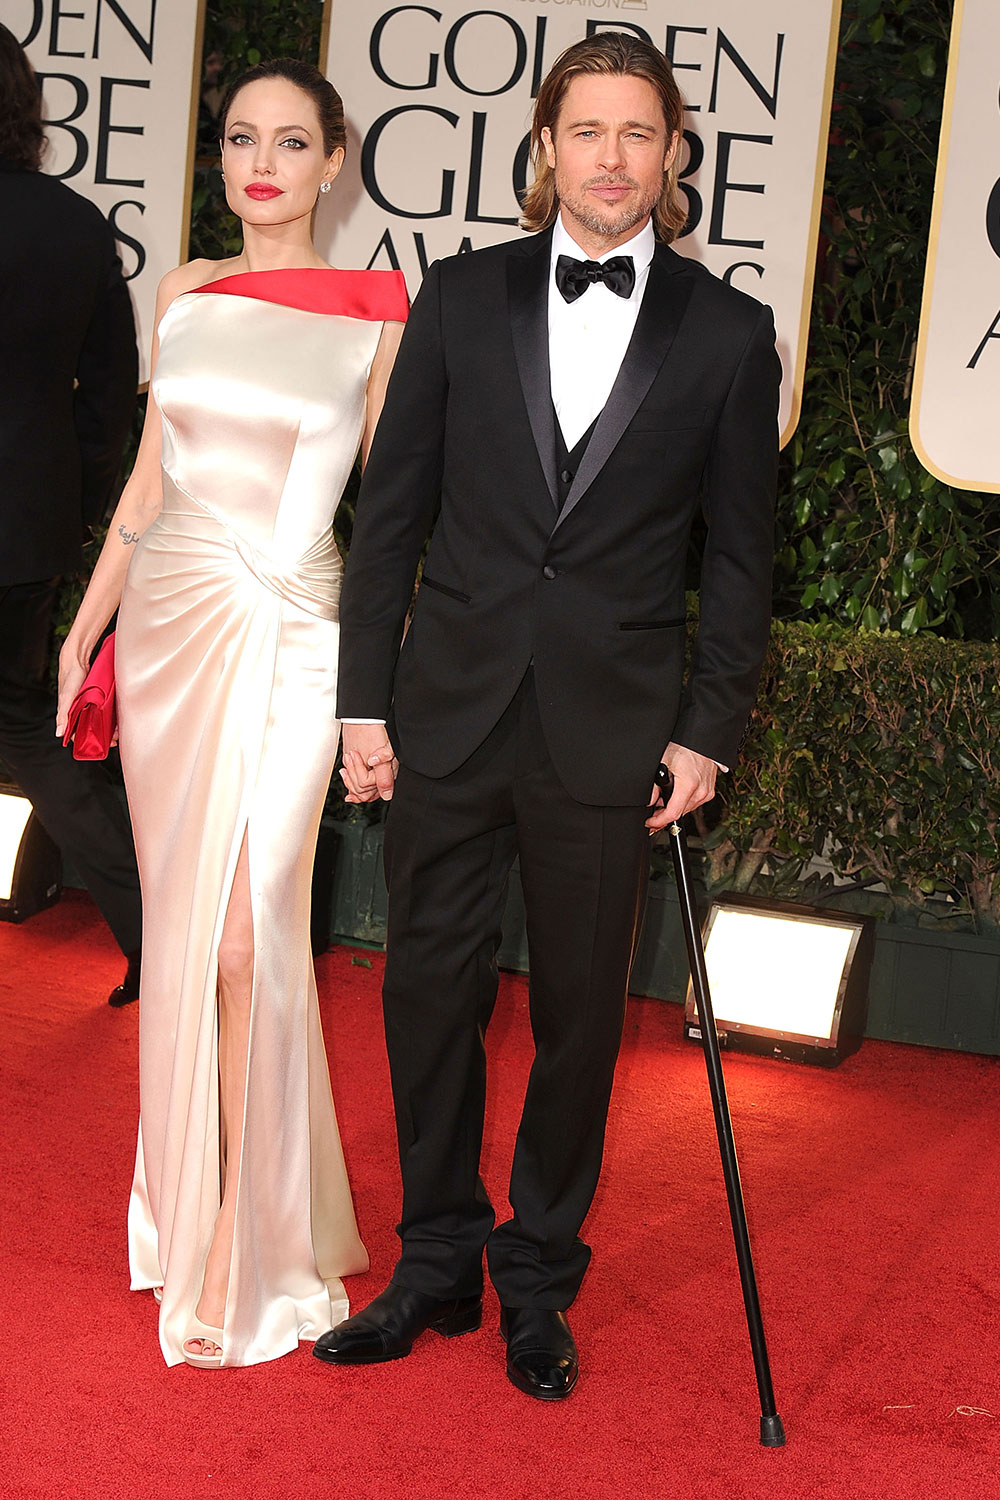 Brad Pitt and Angelina Jolie at the 69th Annual Golden Globe Awards in 2012